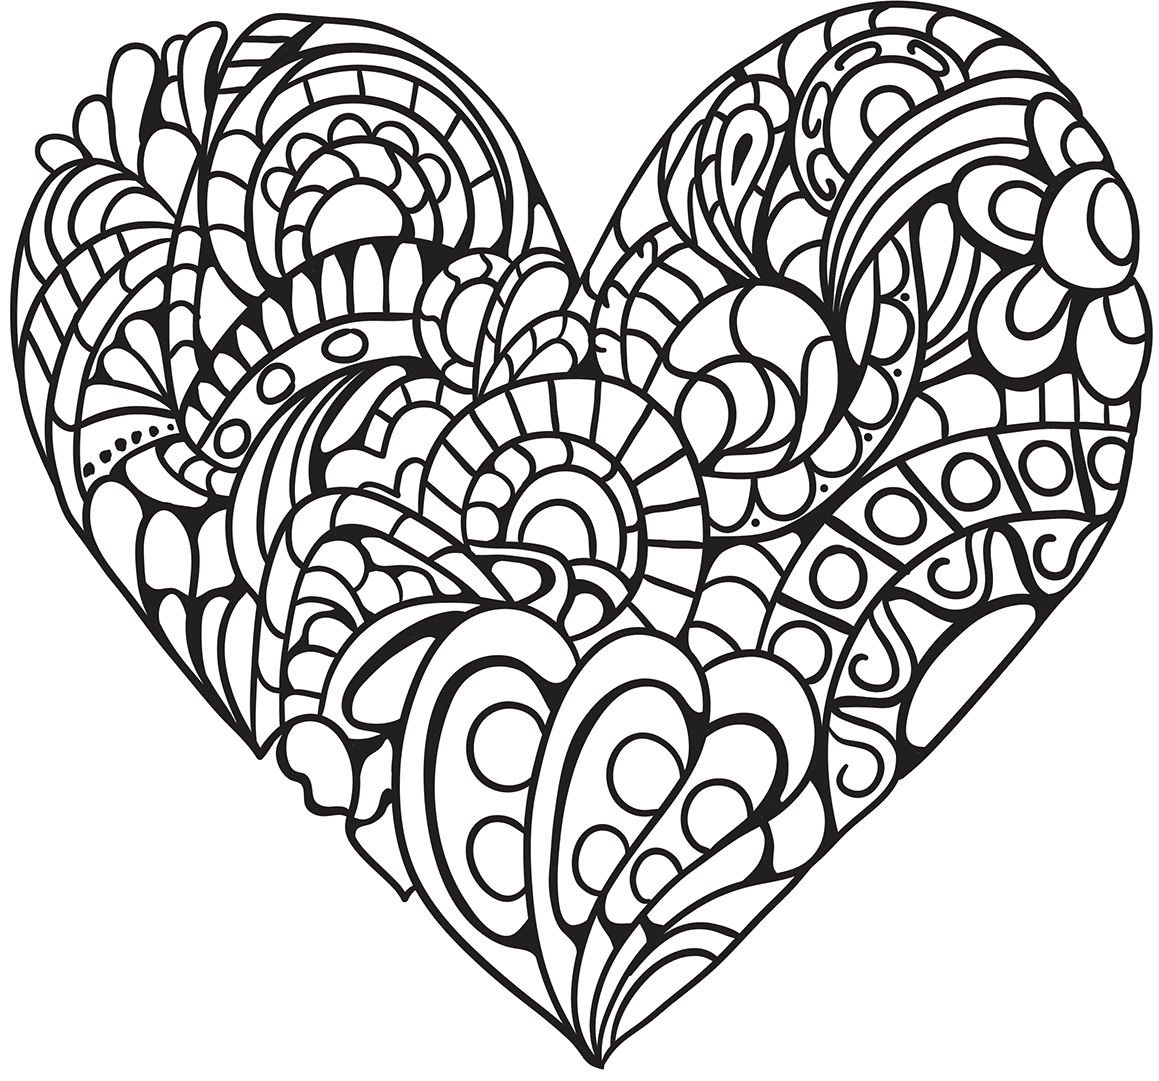 Zentangle Heart For Adult Coloring Page